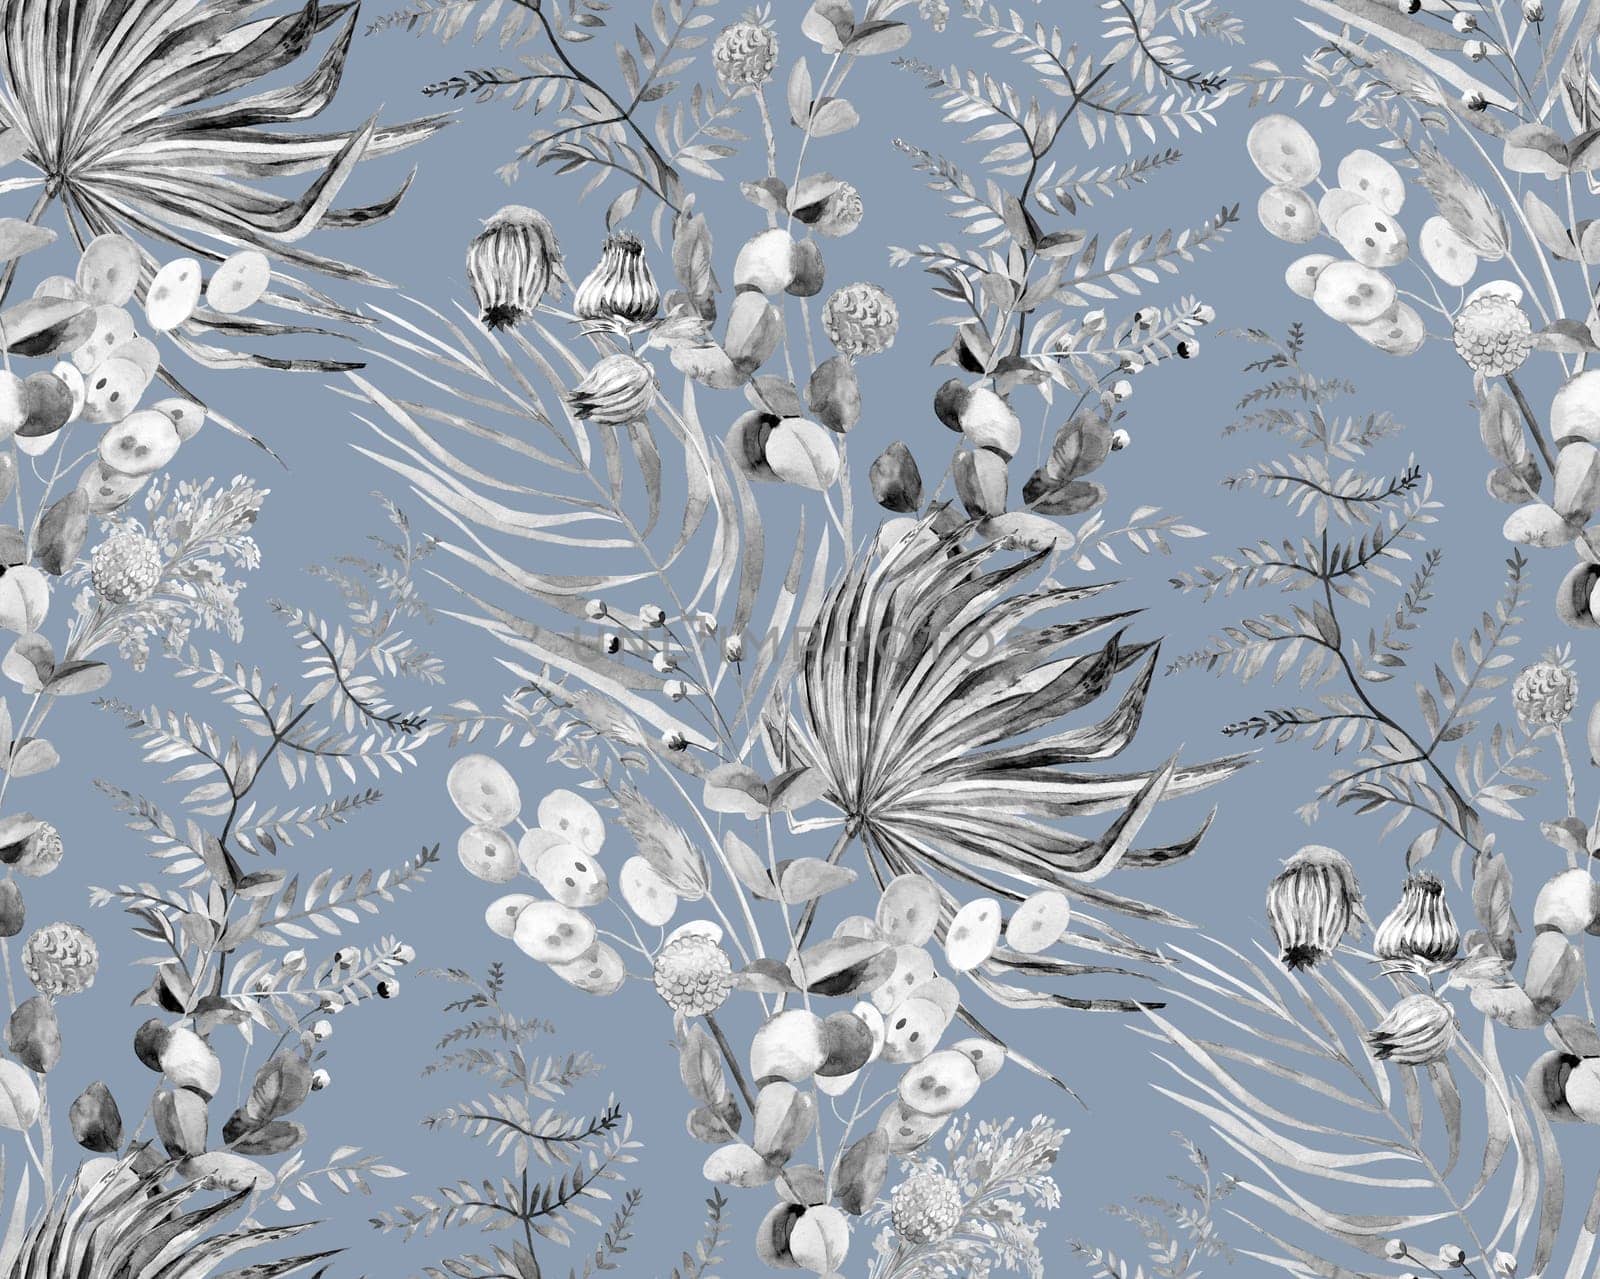 Seamless watercolor monochrome pattern with tropical palm leaves and herbs by MarinaVoyush